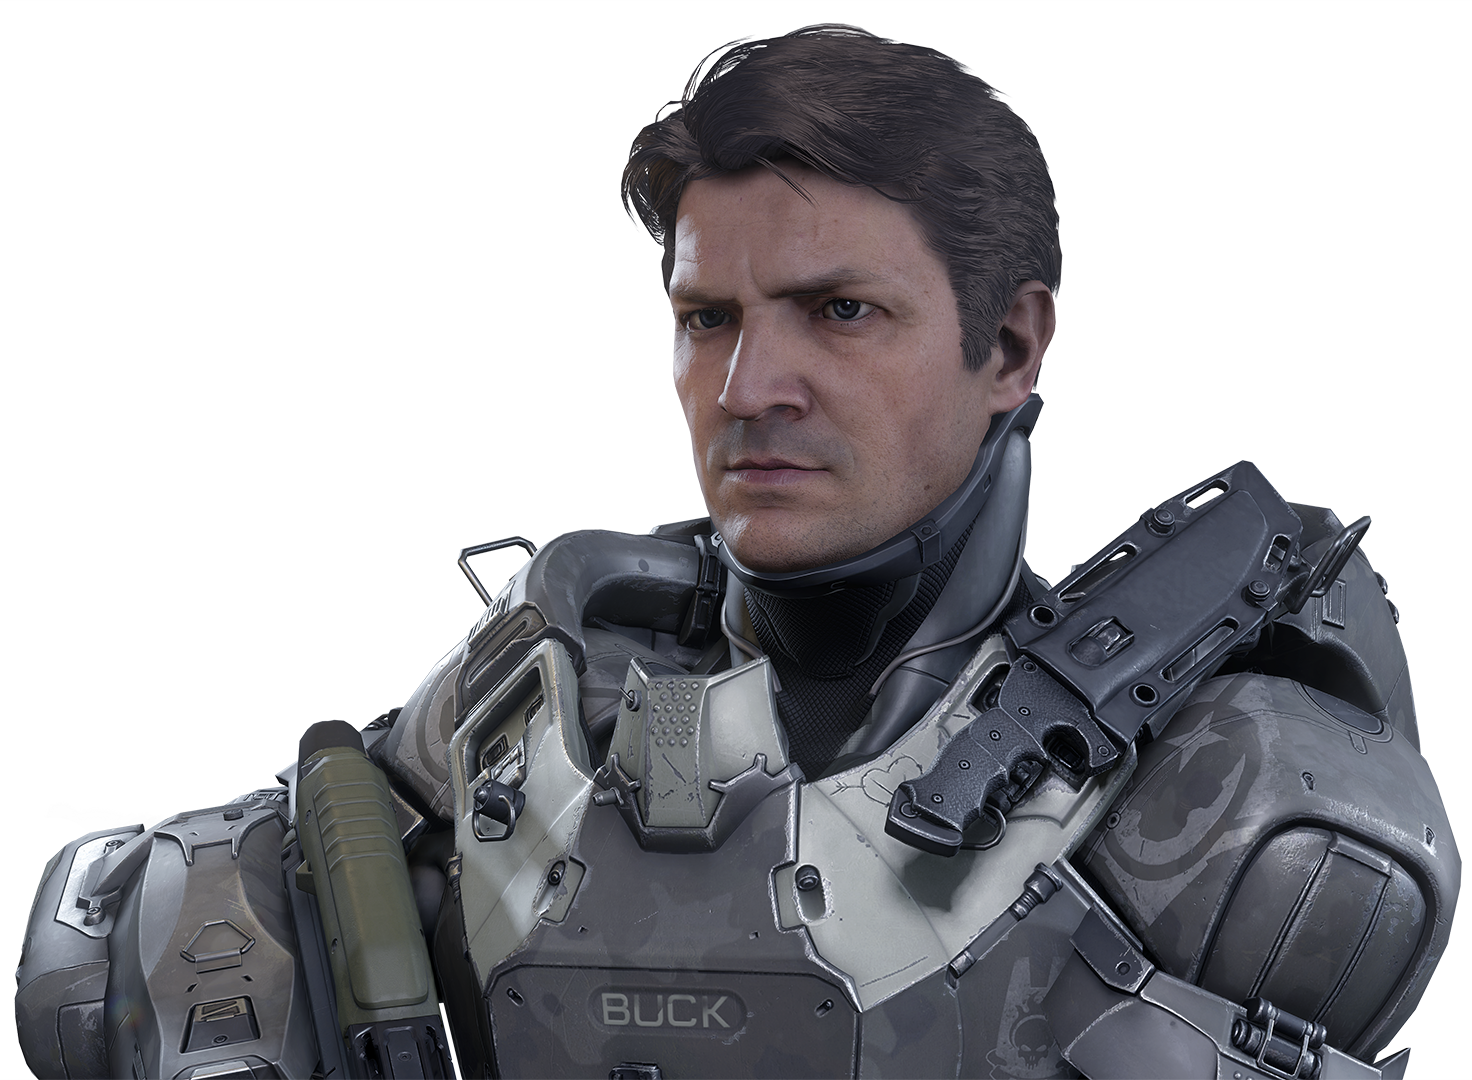 General 1472x1080 Halo 5 Halo 5: Guardians Spartan Buck Nathan Fillion Spartans (Halo) video game characters